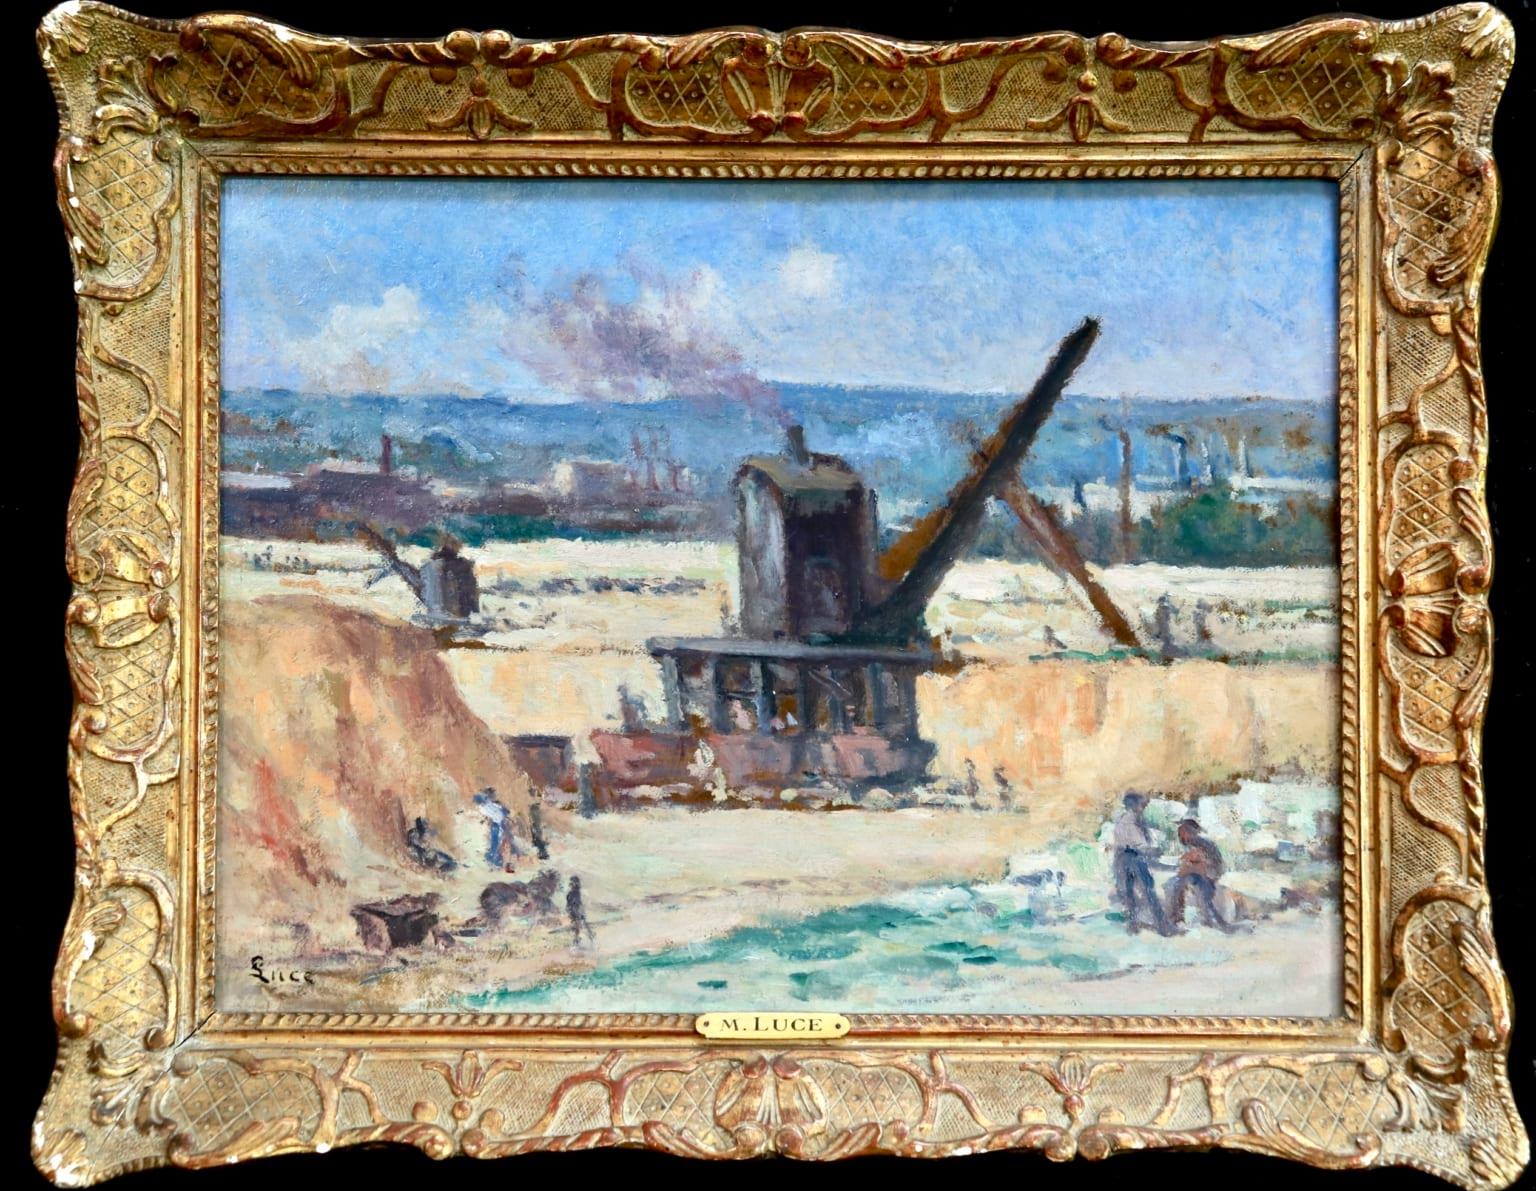 Industrie-Charleroi - Impressionist Oil, Figures in Landscape by Maximilien Luce